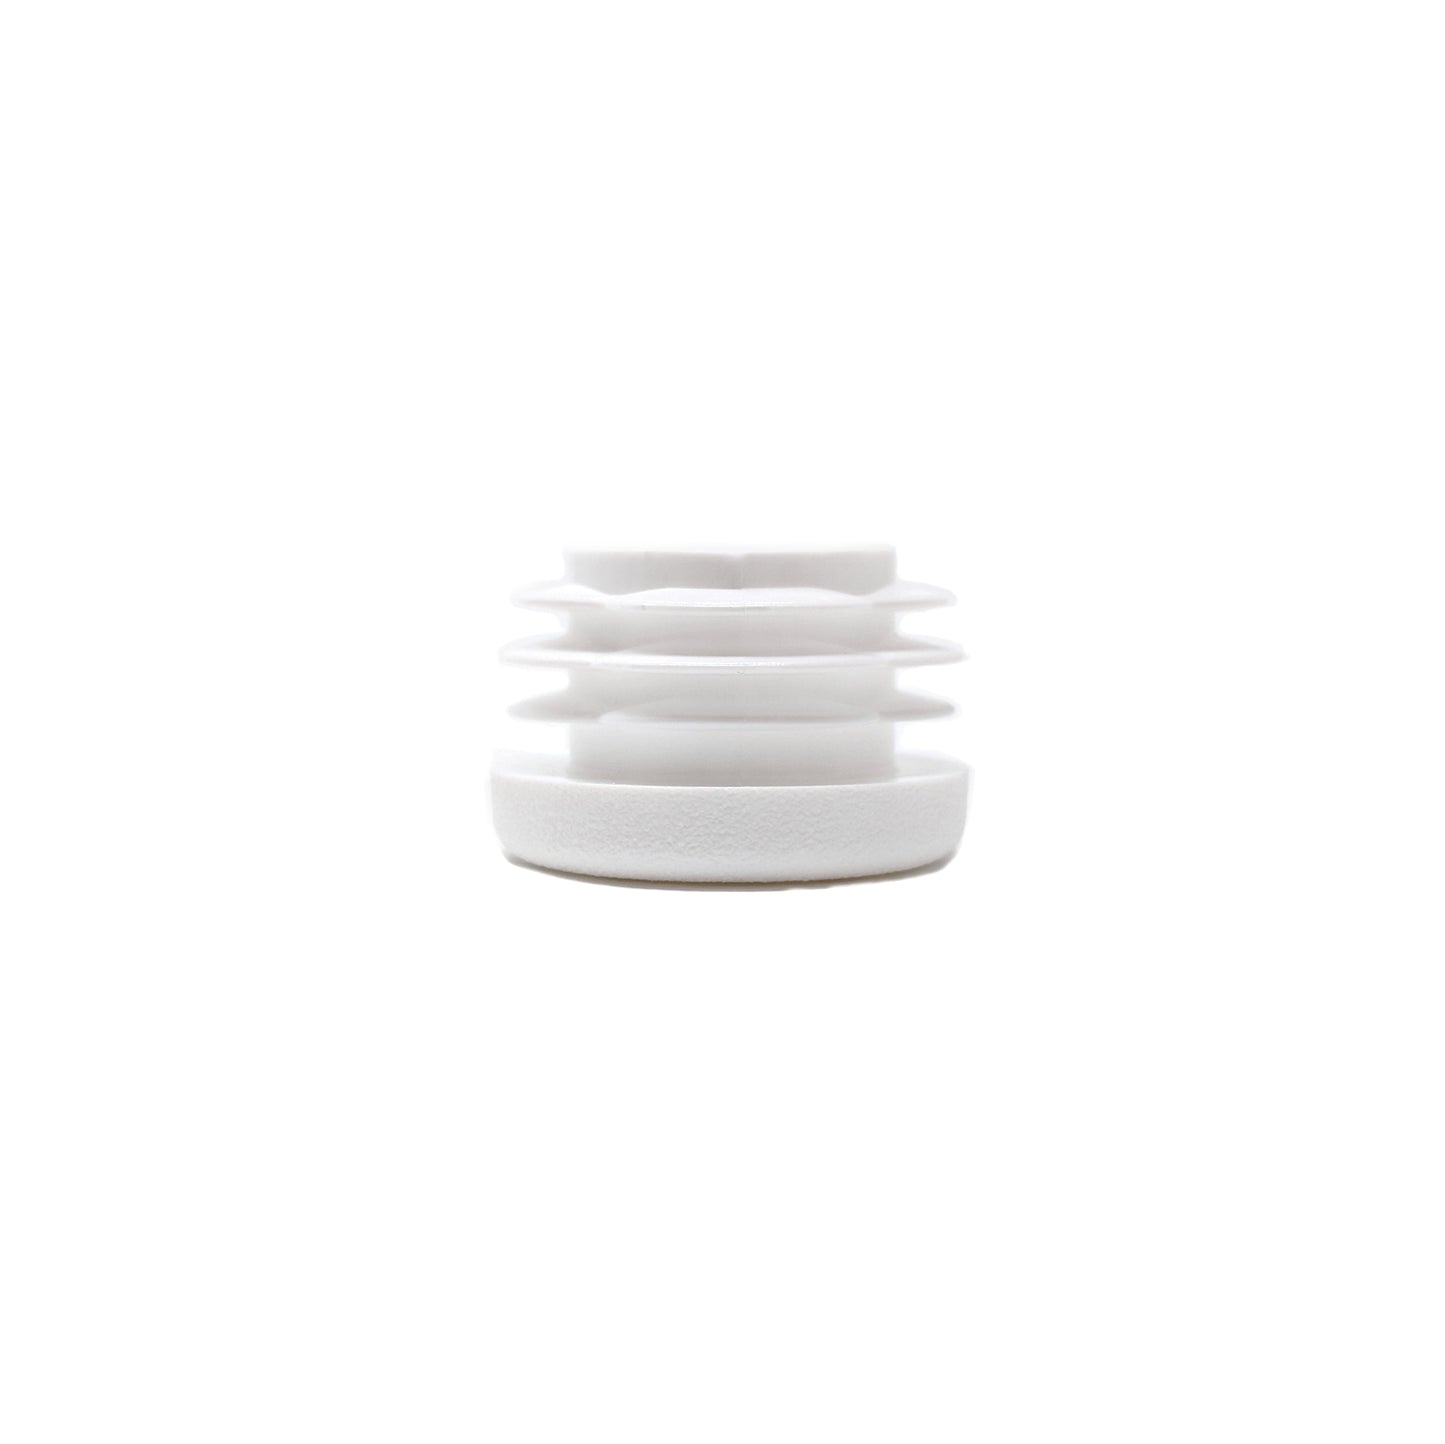 Round Tube Inserts 26mm White | Made in Germany | Keay Vital Parts - Keay Vital Parts